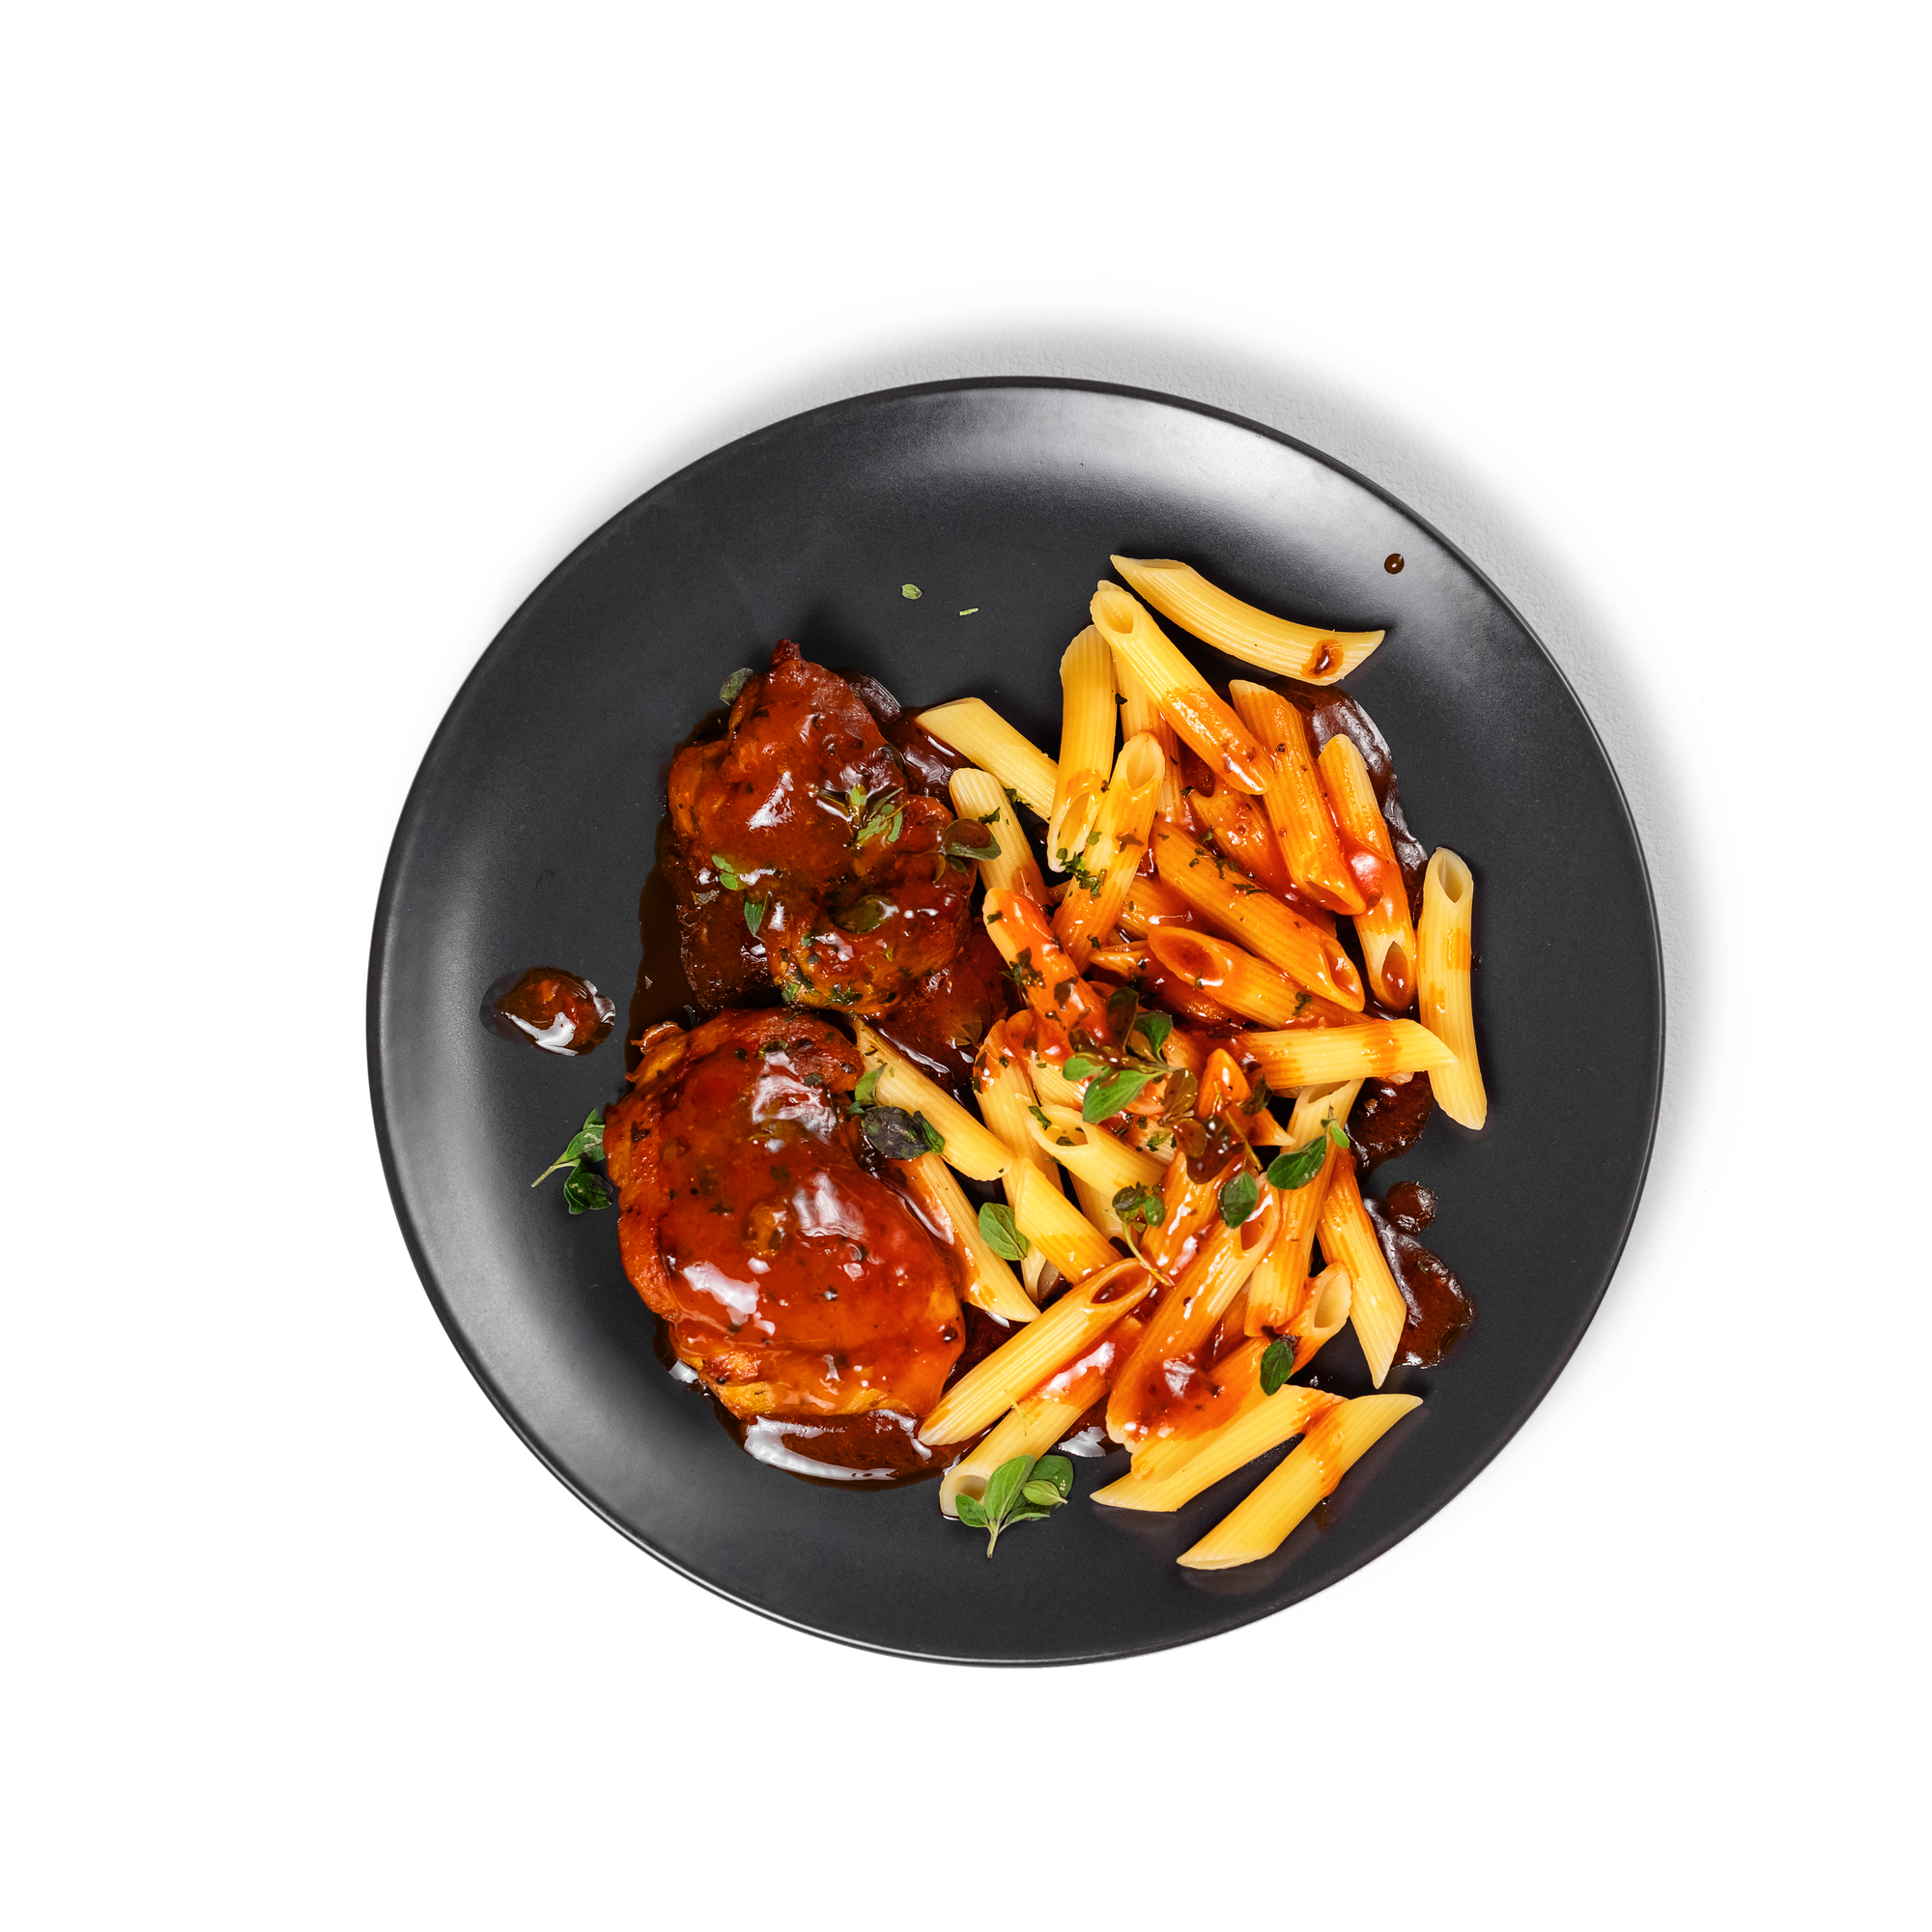 Plated chicken dinner in an olive-oil infused tomato sauce served with pasta.